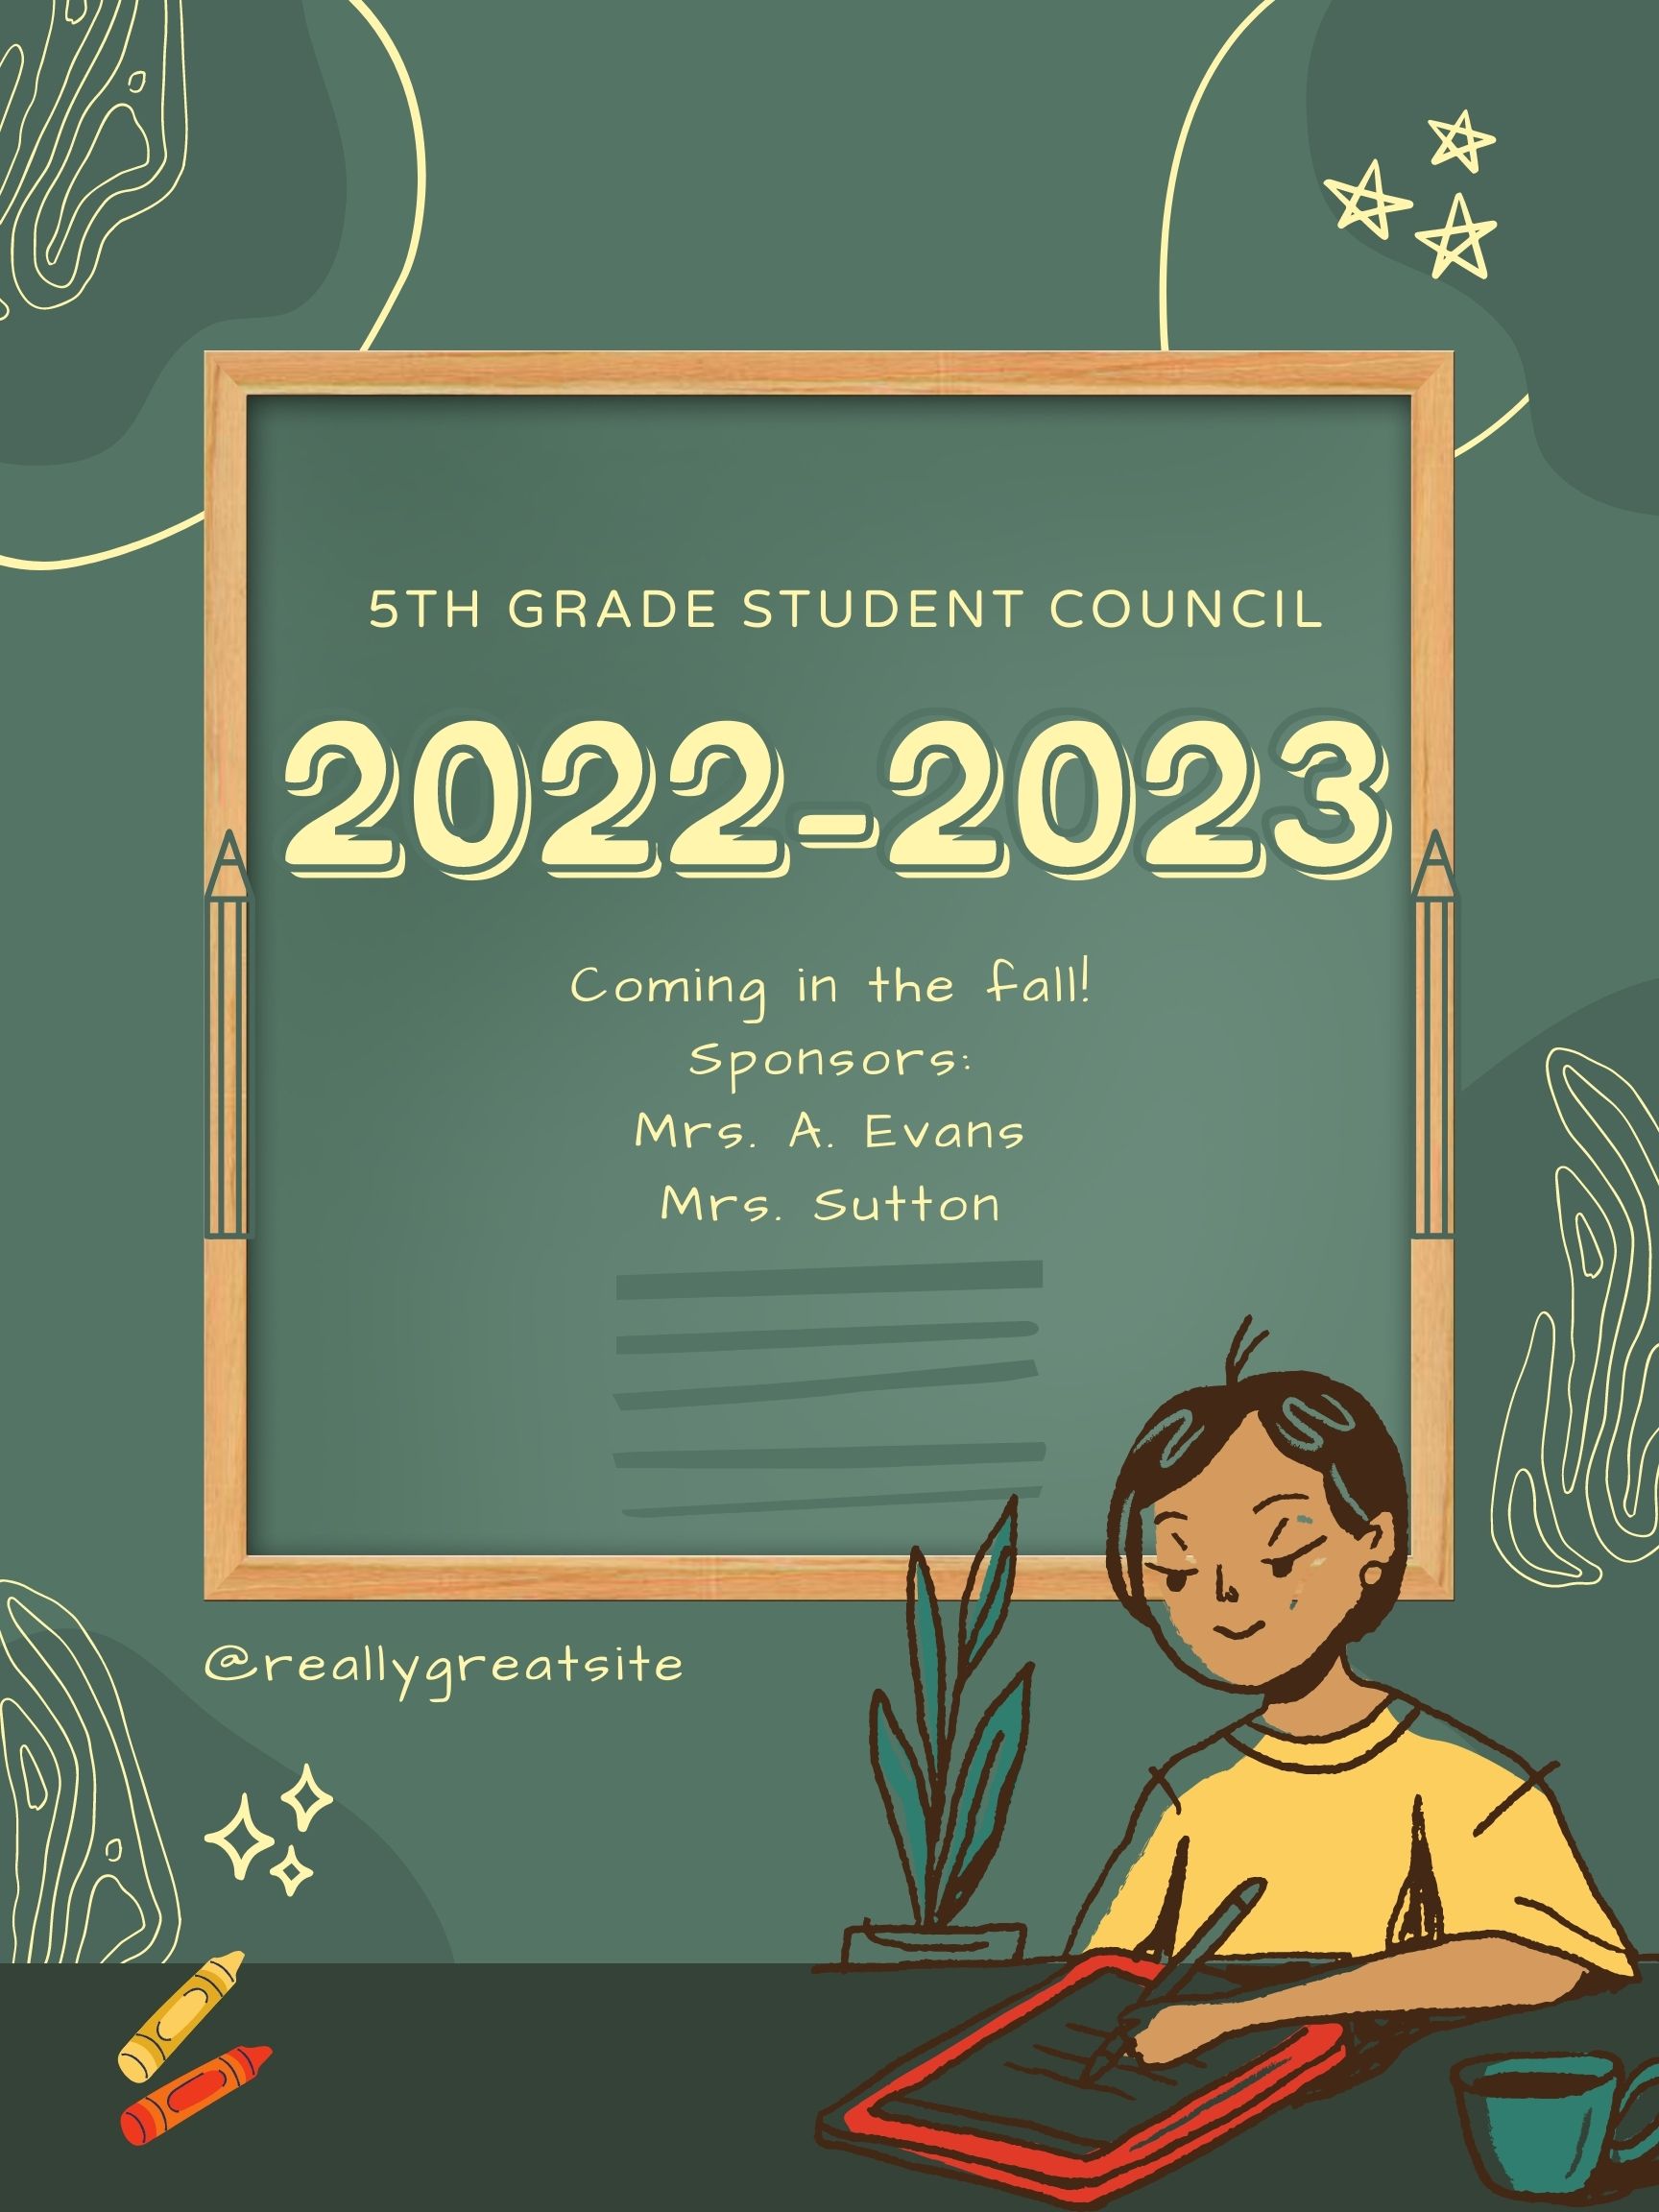 5th Grade Student Council Coming Fall 2022